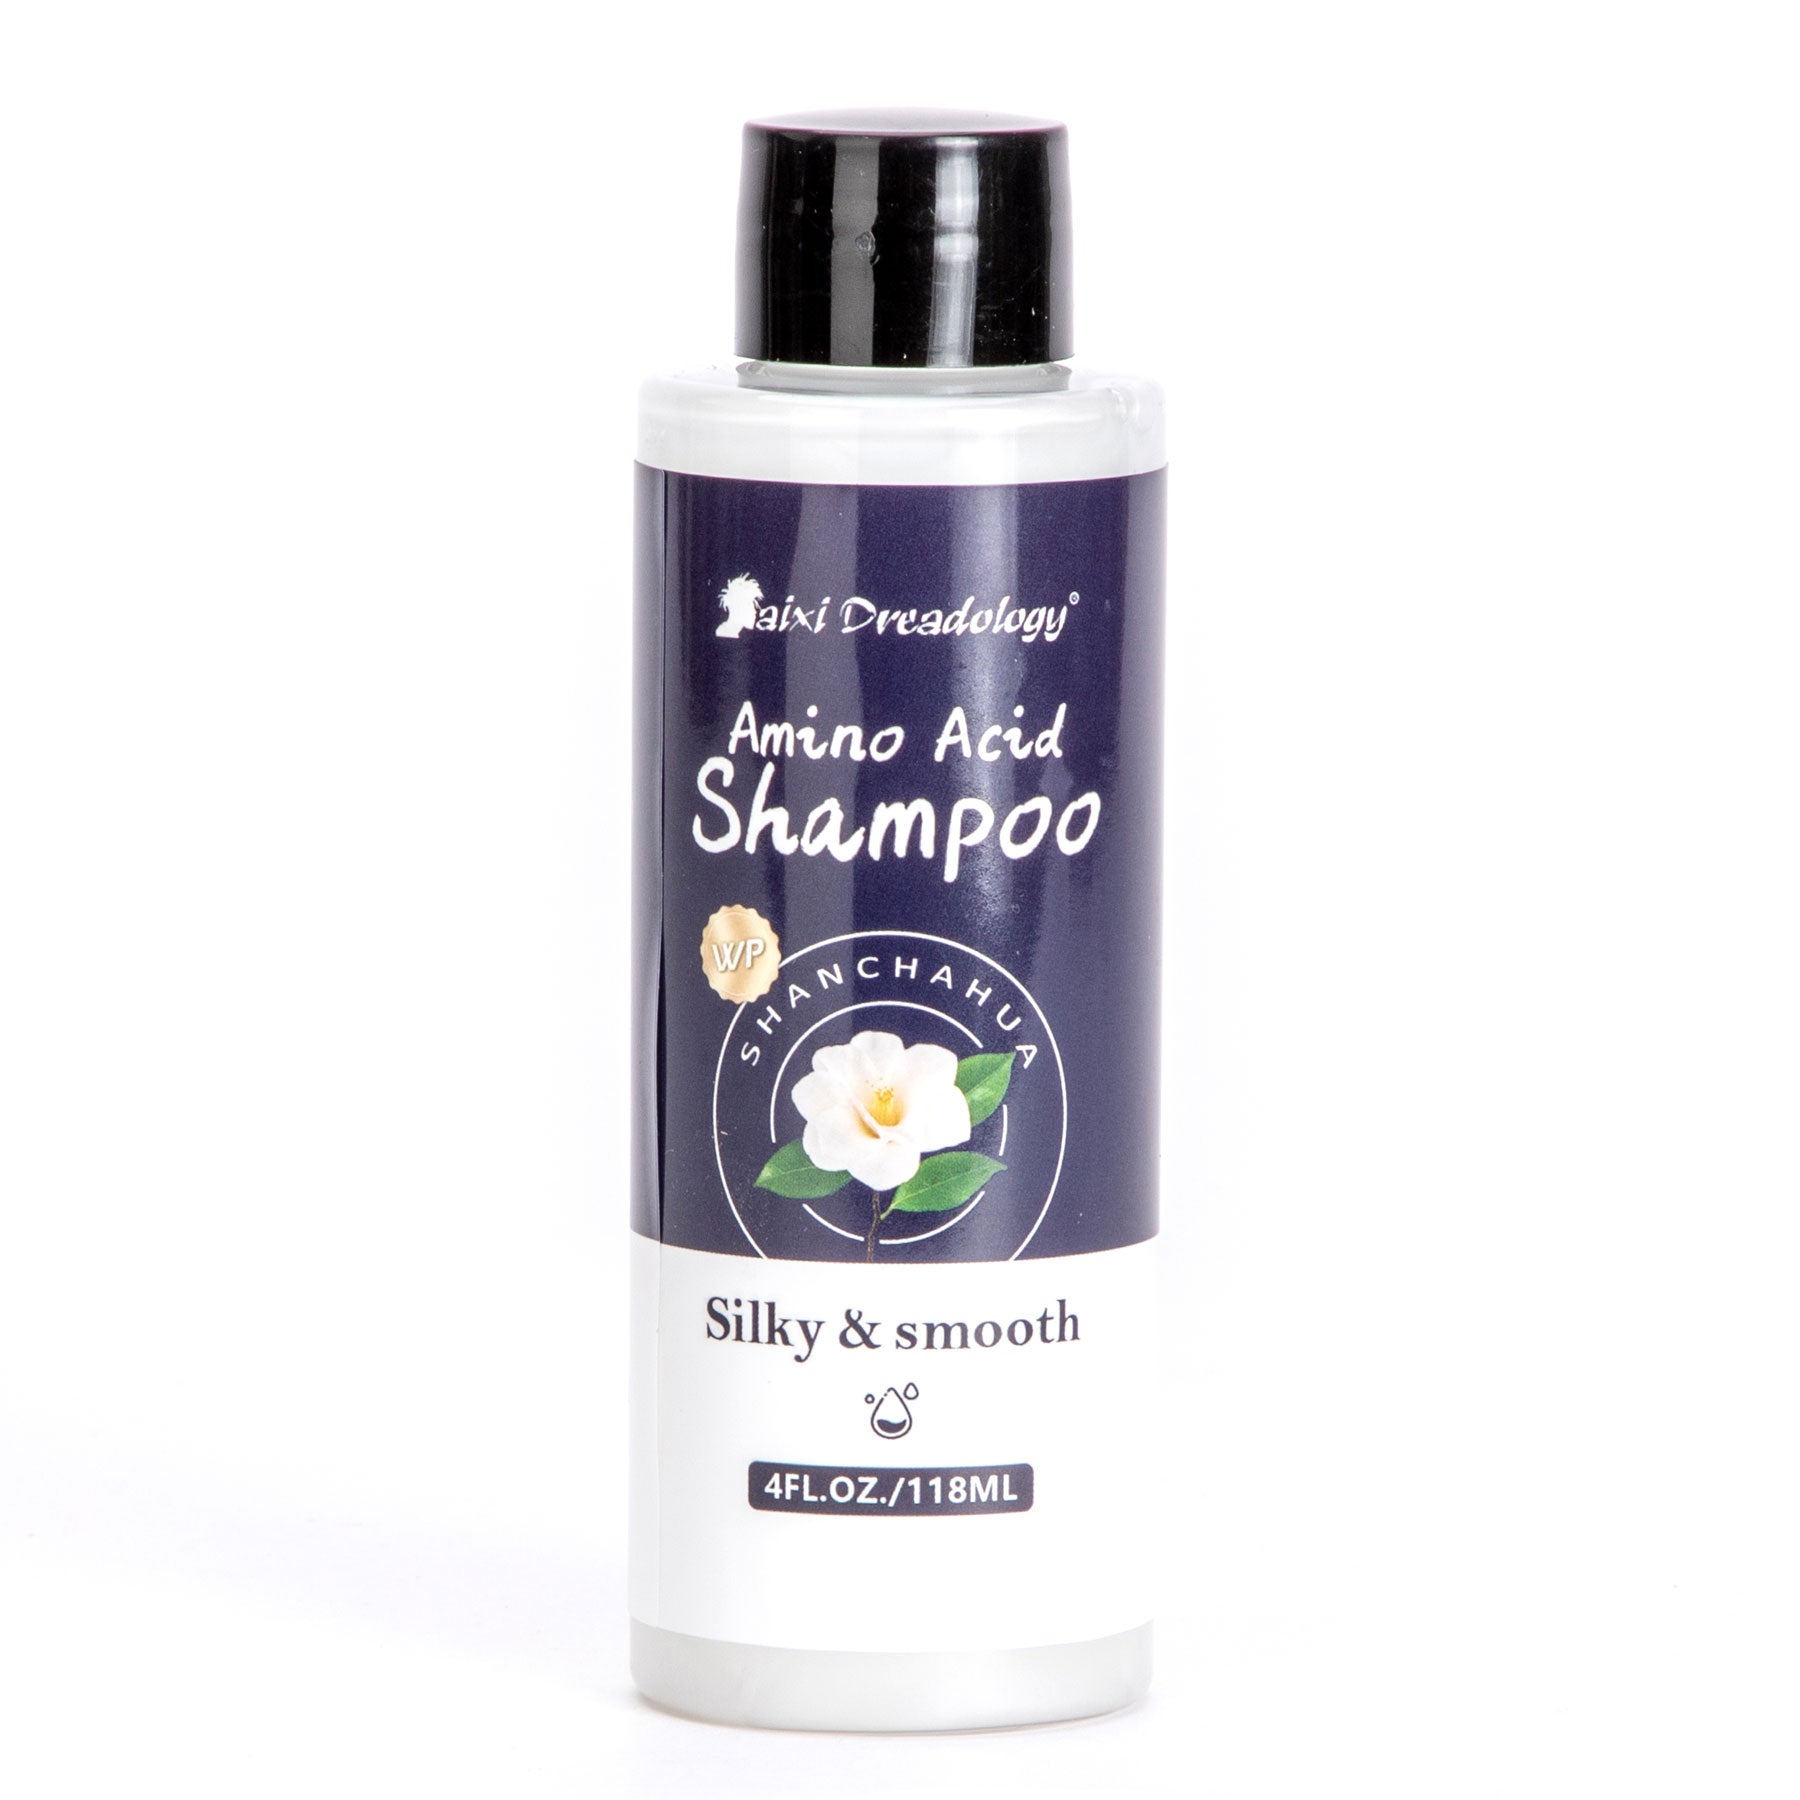 Daixidreadology Amino acid shampoo with Amino Acids and Coconut Oil to Clarify and Cleanse, Helps Strengthen Hair, Prevent Breakage, Without Compromising Hydration, Suitable for All Hair Types, Paraben-Free